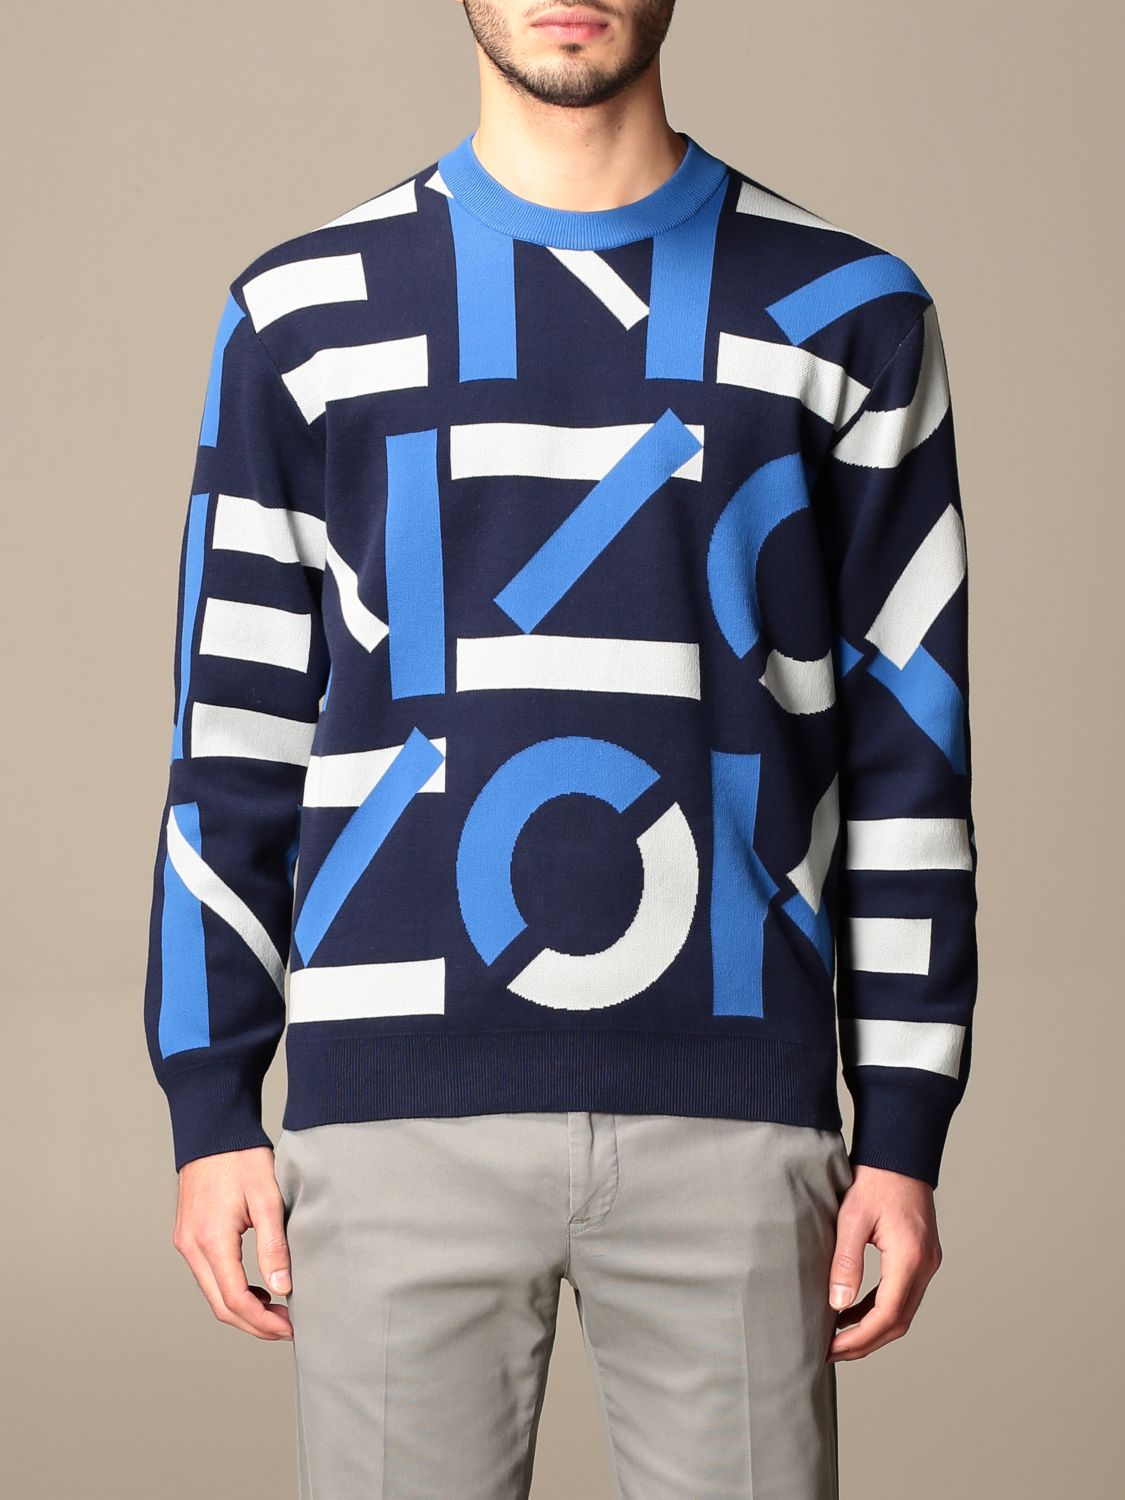 KENZO: crewneck sweater with all over logo - Blue | Kenzo sweater ...